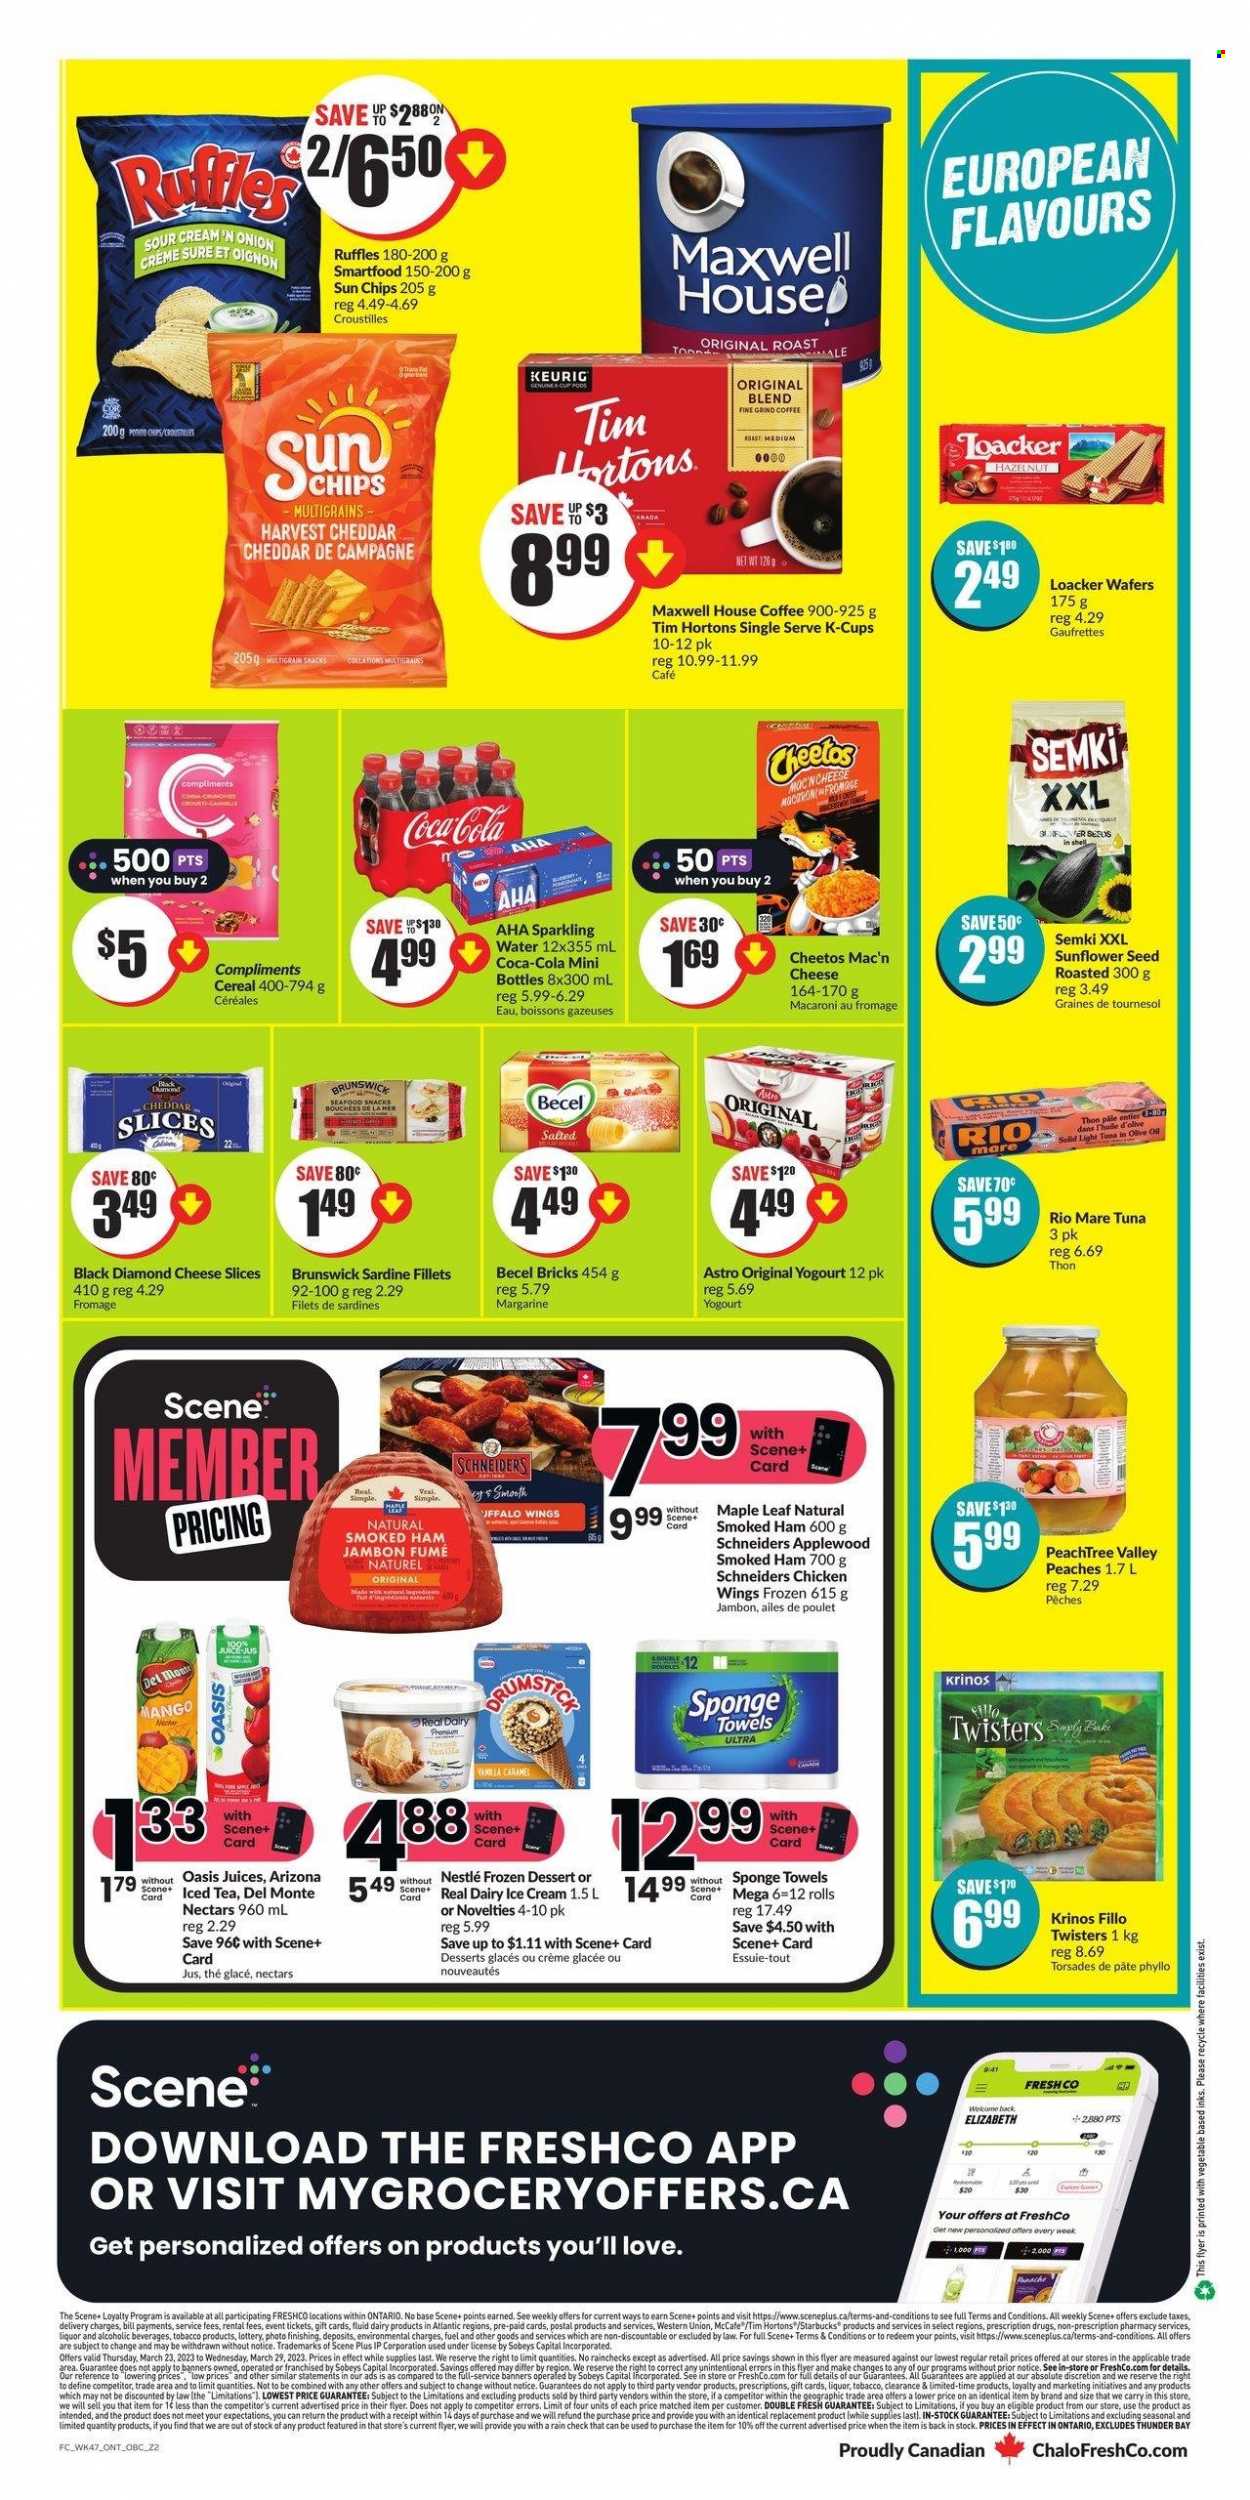 thumbnail - Chalo! FreshCo. Flyer - March 23, 2023 - March 29, 2023 - Sales products - onion, mango, peaches, sardines, tuna, seafood, macaroni, roast, ham, smoked ham, sliced cheese, cheese, margarine, sour cream, ice cream, chicken wings, wafers, snack, Cheetos, Smartfood, Ruffles, light tuna, Del Monte, cereals, caramel, Coca-Cola, juice, ice tea, AriZona, sparkling water, water, Maxwell House, coffee, coffee capsules, Starbucks, K-Cups, Keurig, chicken, Absolute, Sure, sponge, plant seeds, Nestlé. Page 6.